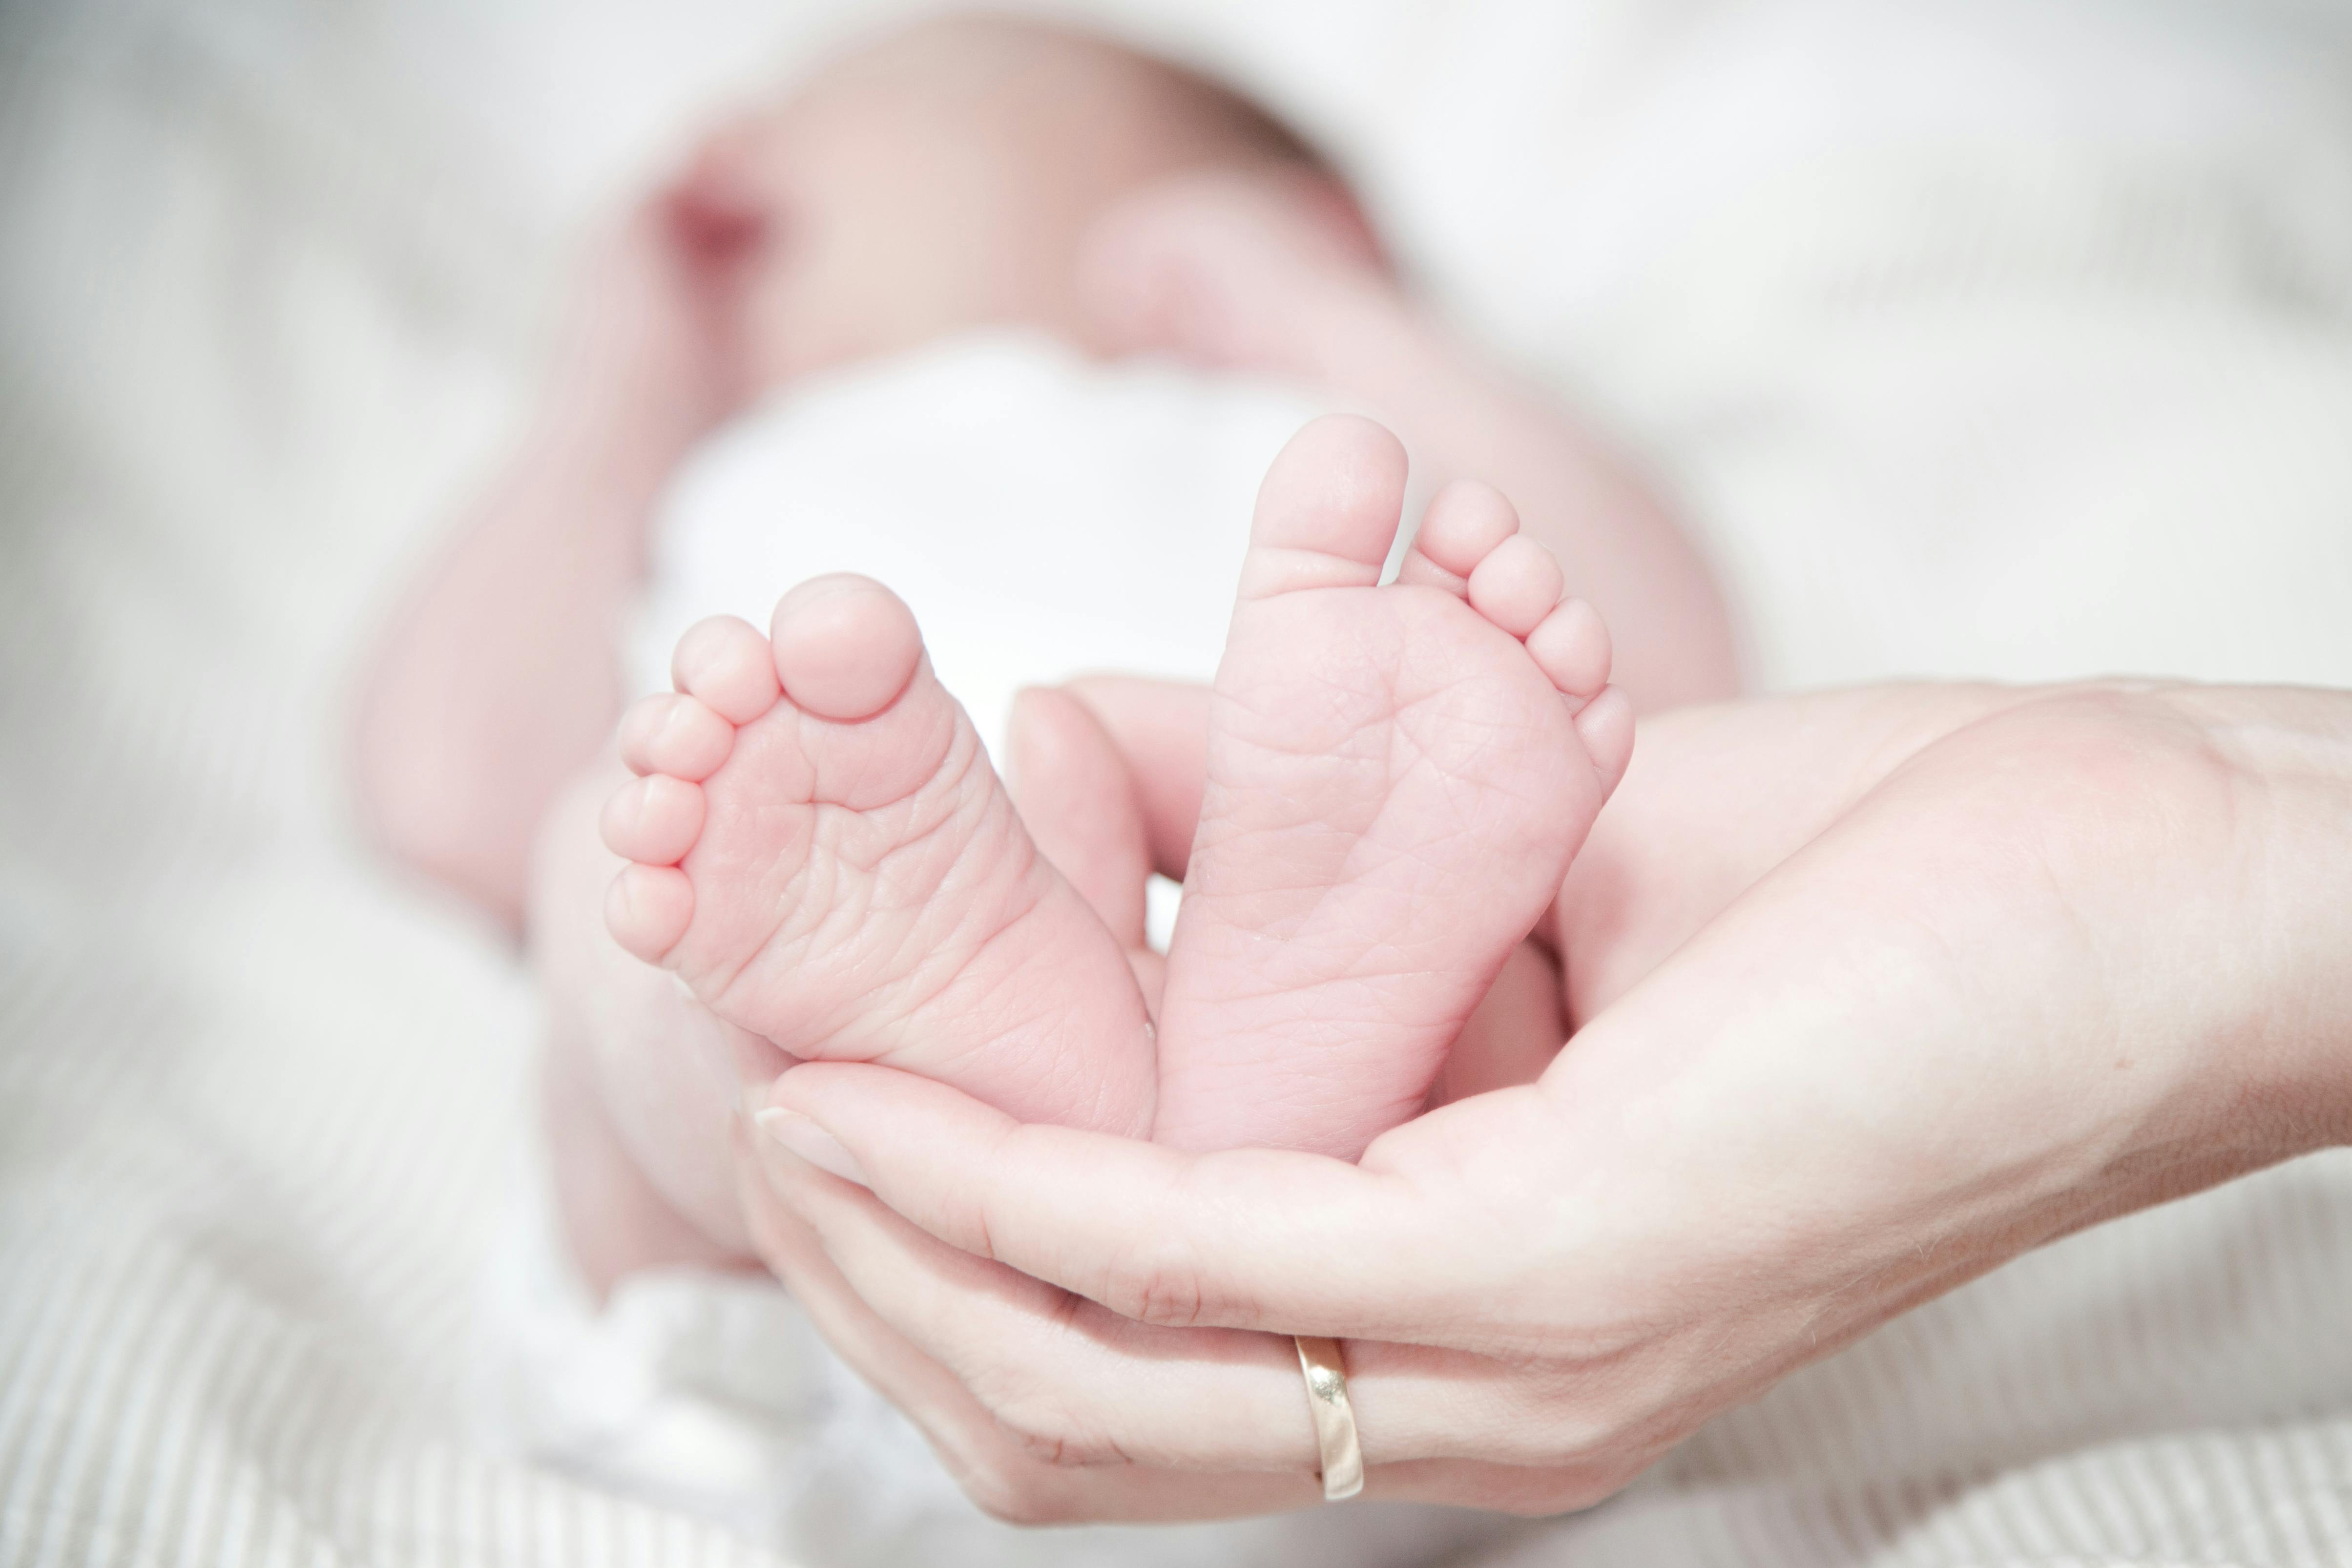 A woman holding her newborn baby's feet | Source: Pexels